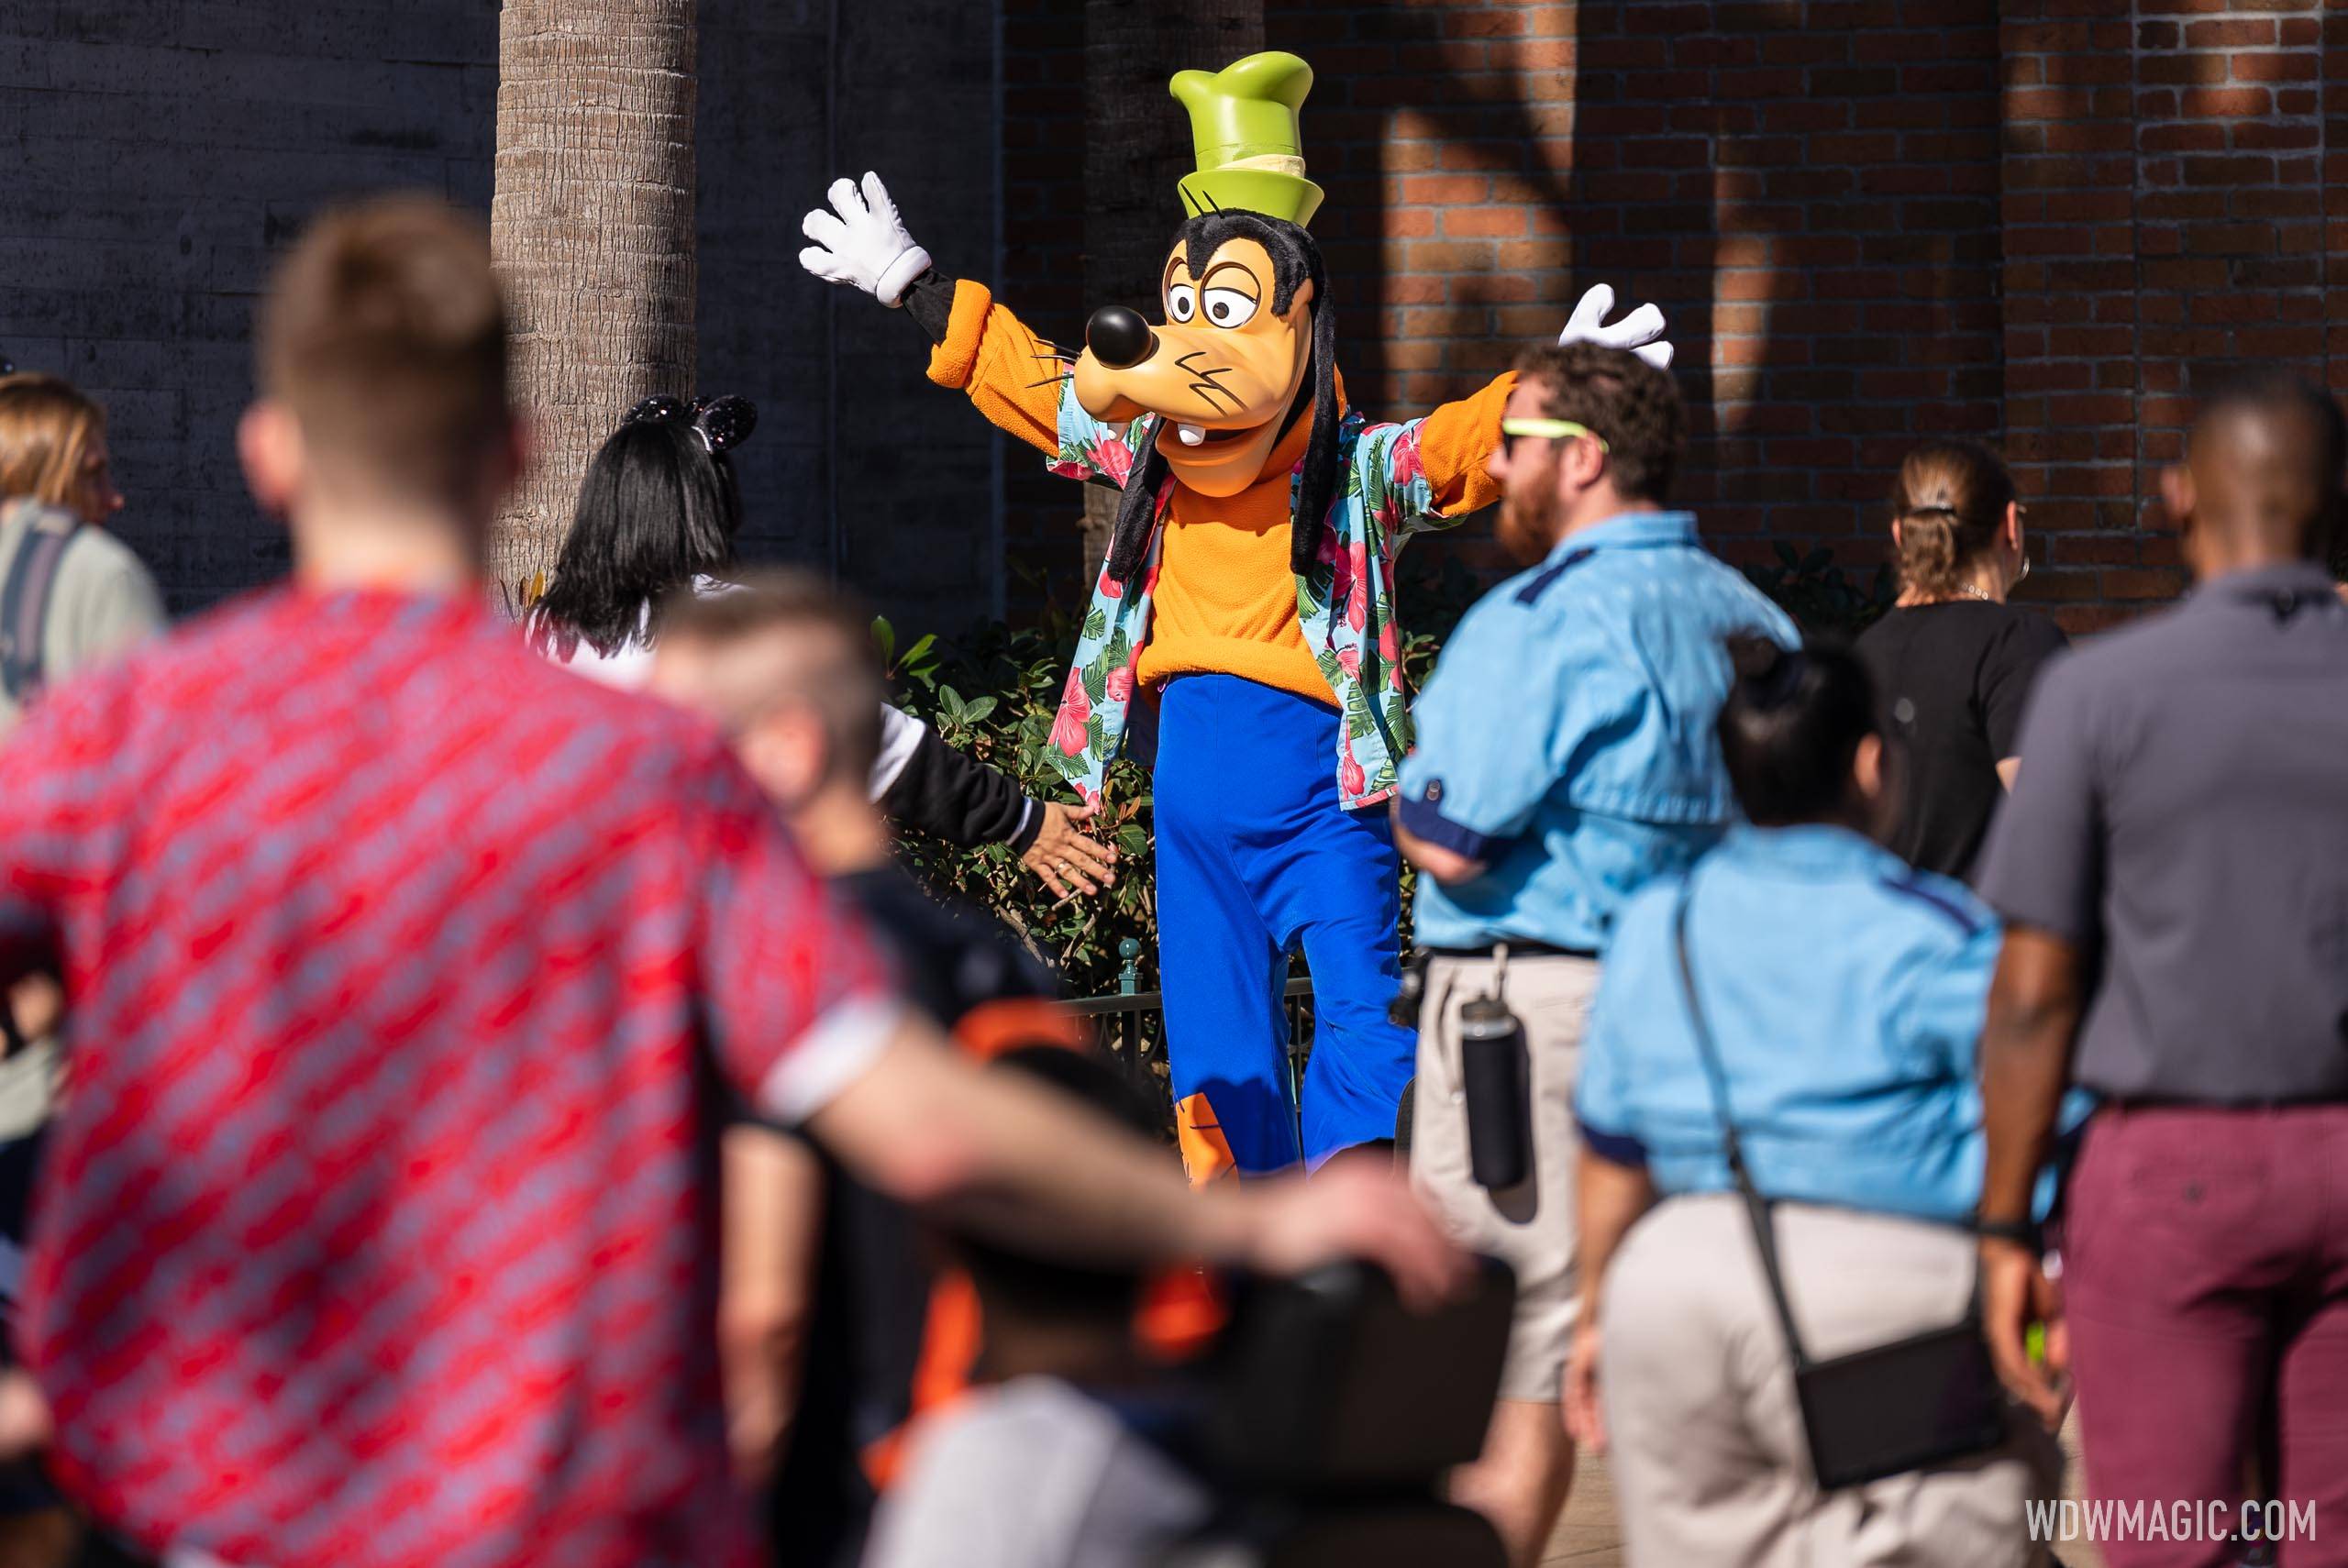 Goofy and Max return to meet and greets in a new location at Disney's Hollywood Studios